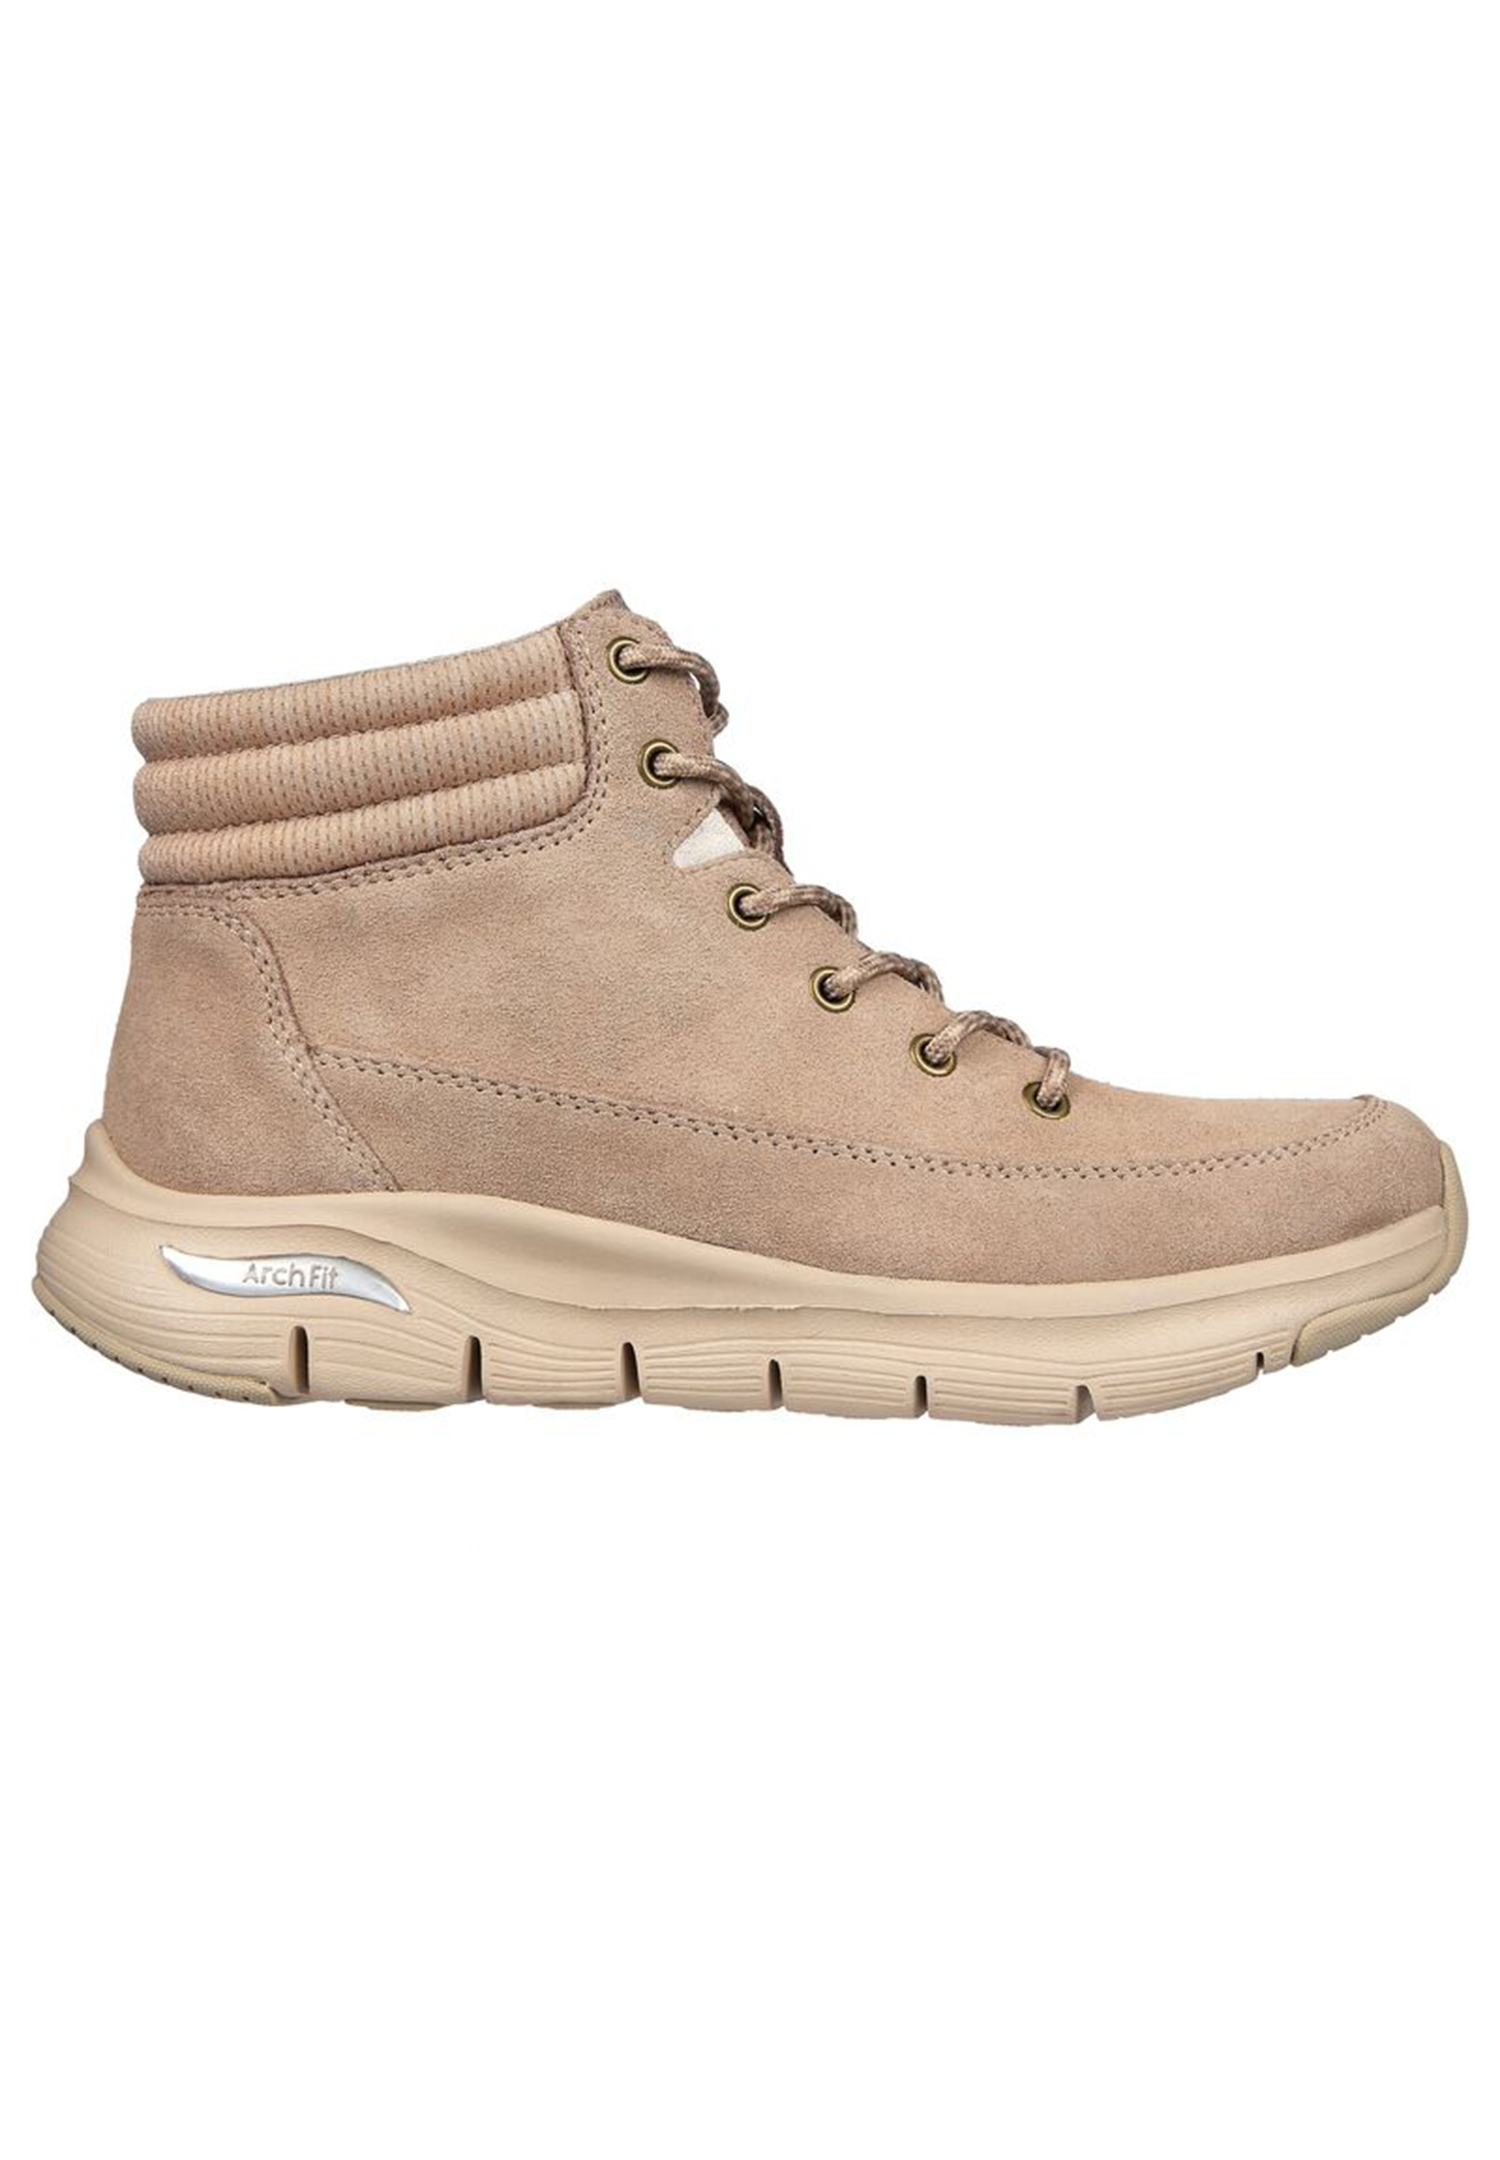 Skechers Arch Fit Smooth COMFY CHILL Damen Stiefel 167373 TPE taupe